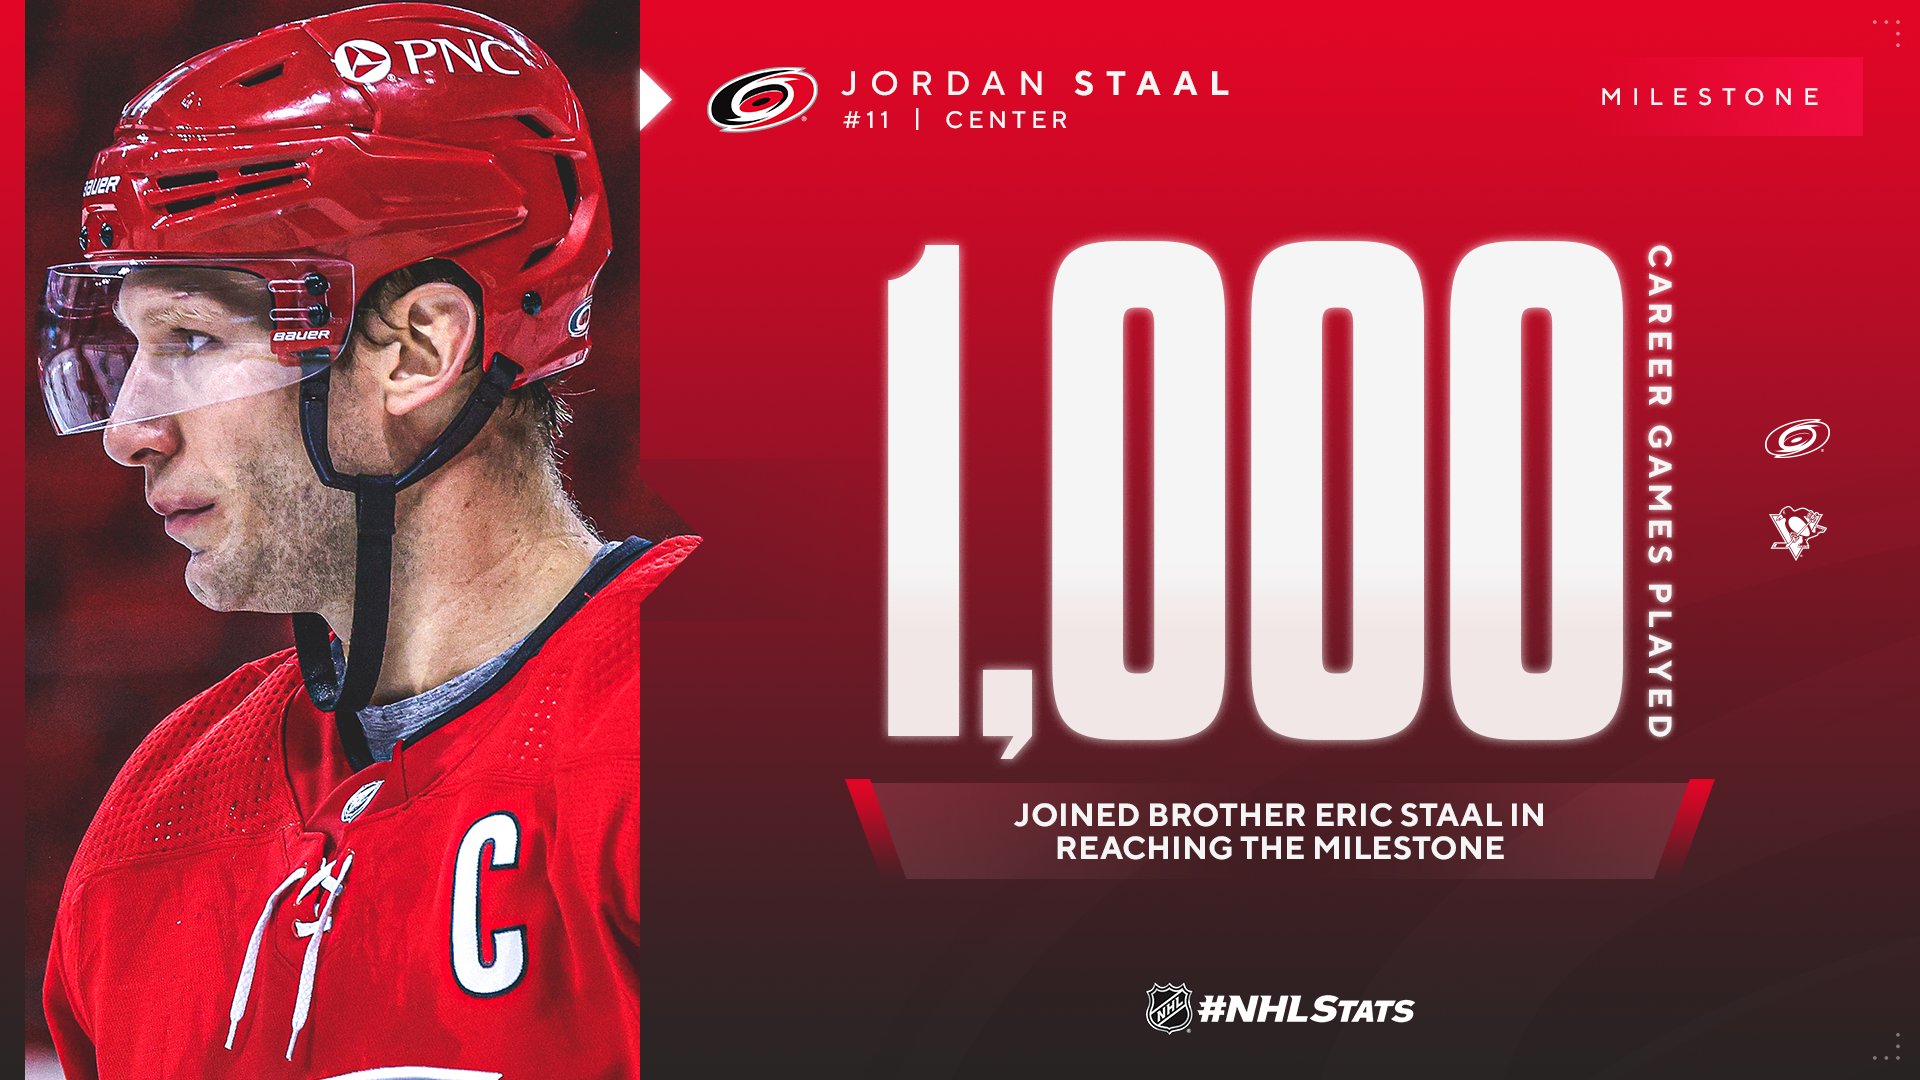 NHL Public Relations on X: Jordan Staal is skating in his 1,000th career  game tonight and joined brother Eric Staal (1,277 GP) in reaching the  milestone. They are the only set of